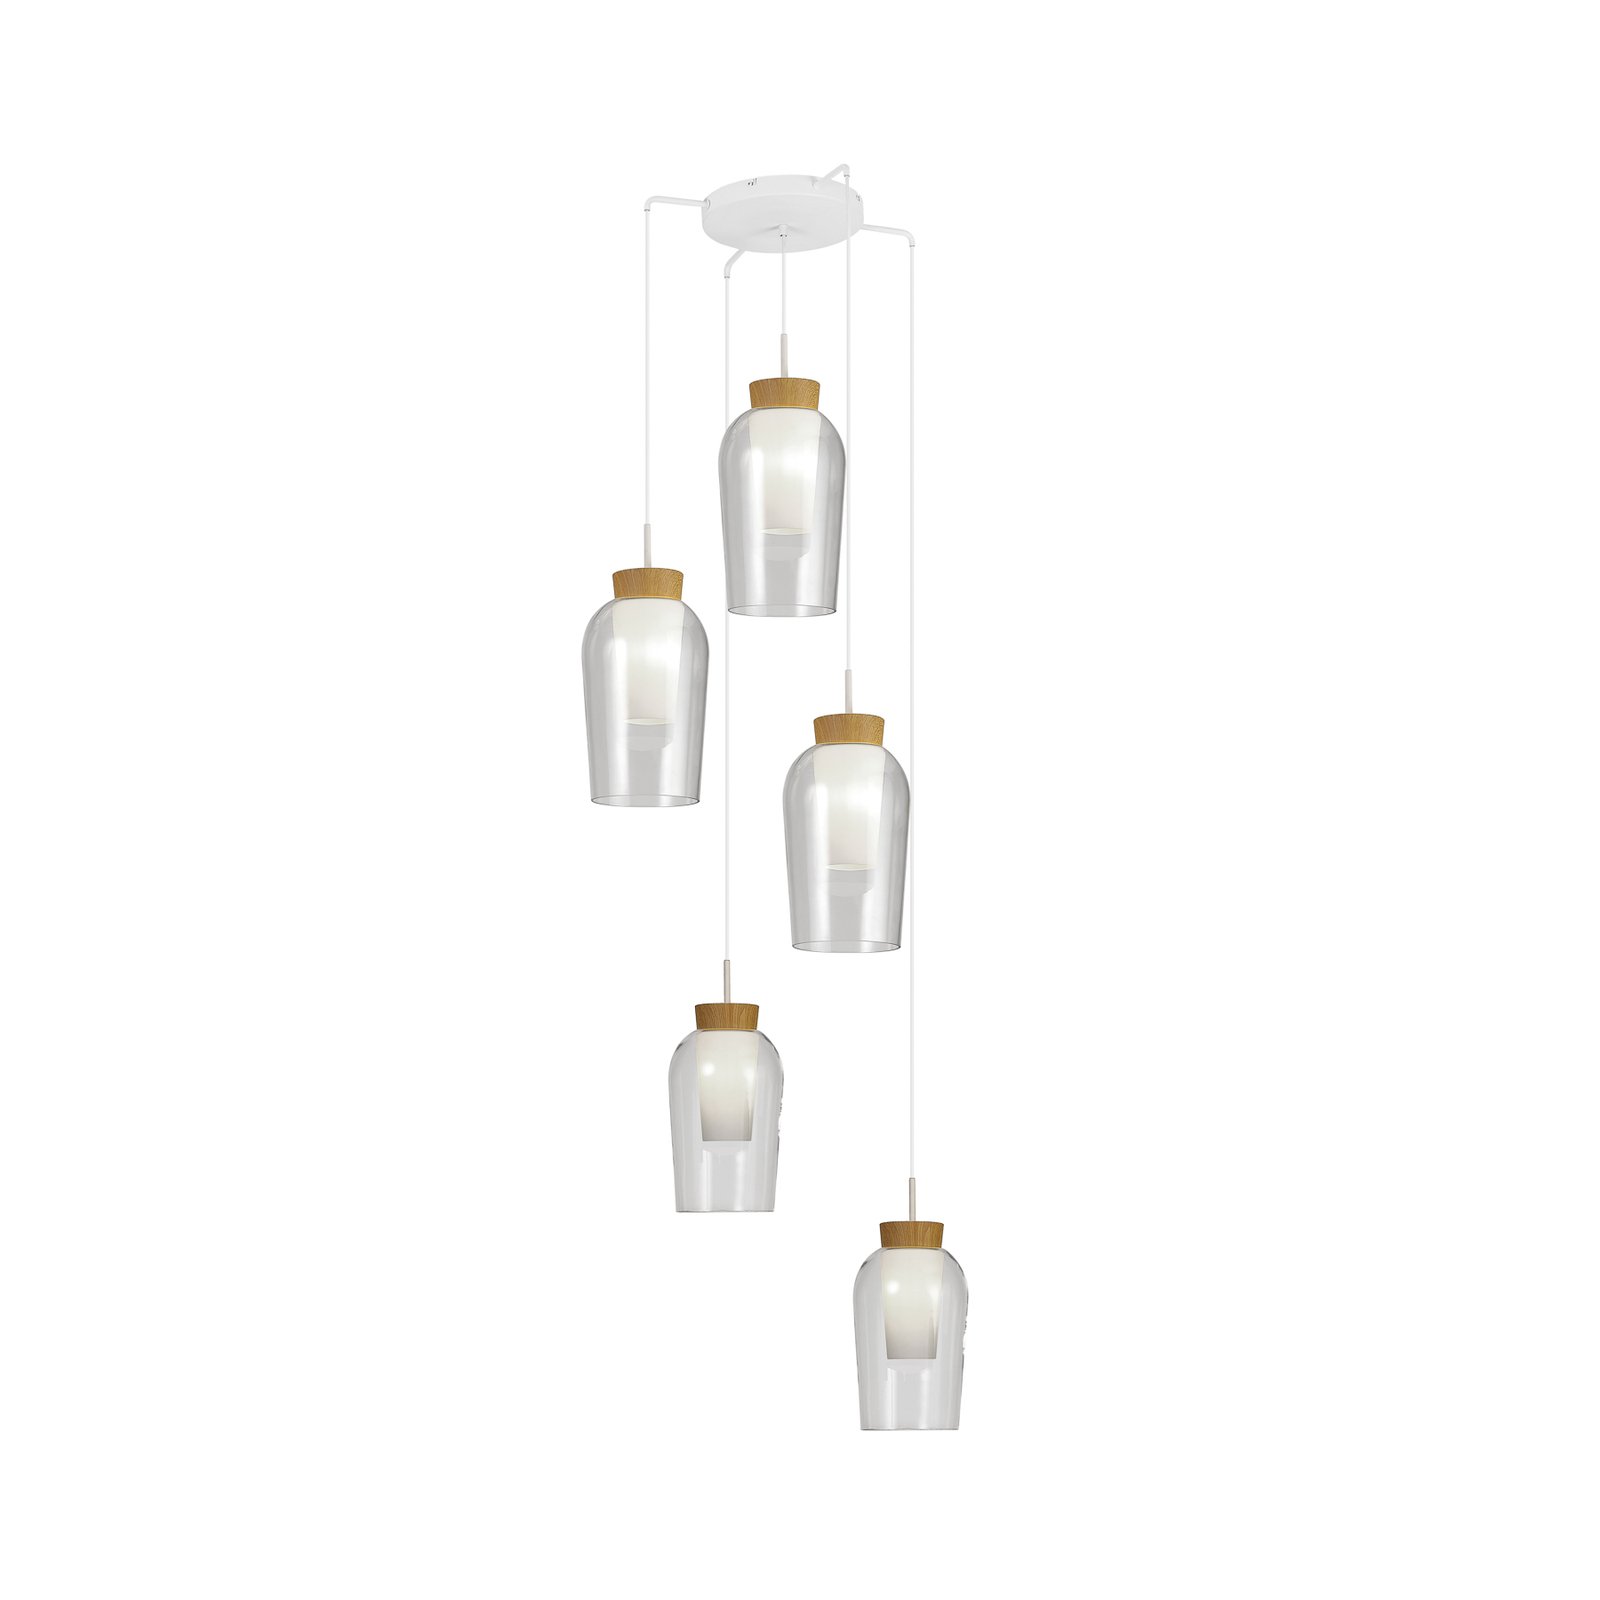 Hanglamp Nora, wit, transparant, 5-lamps, rond, glas